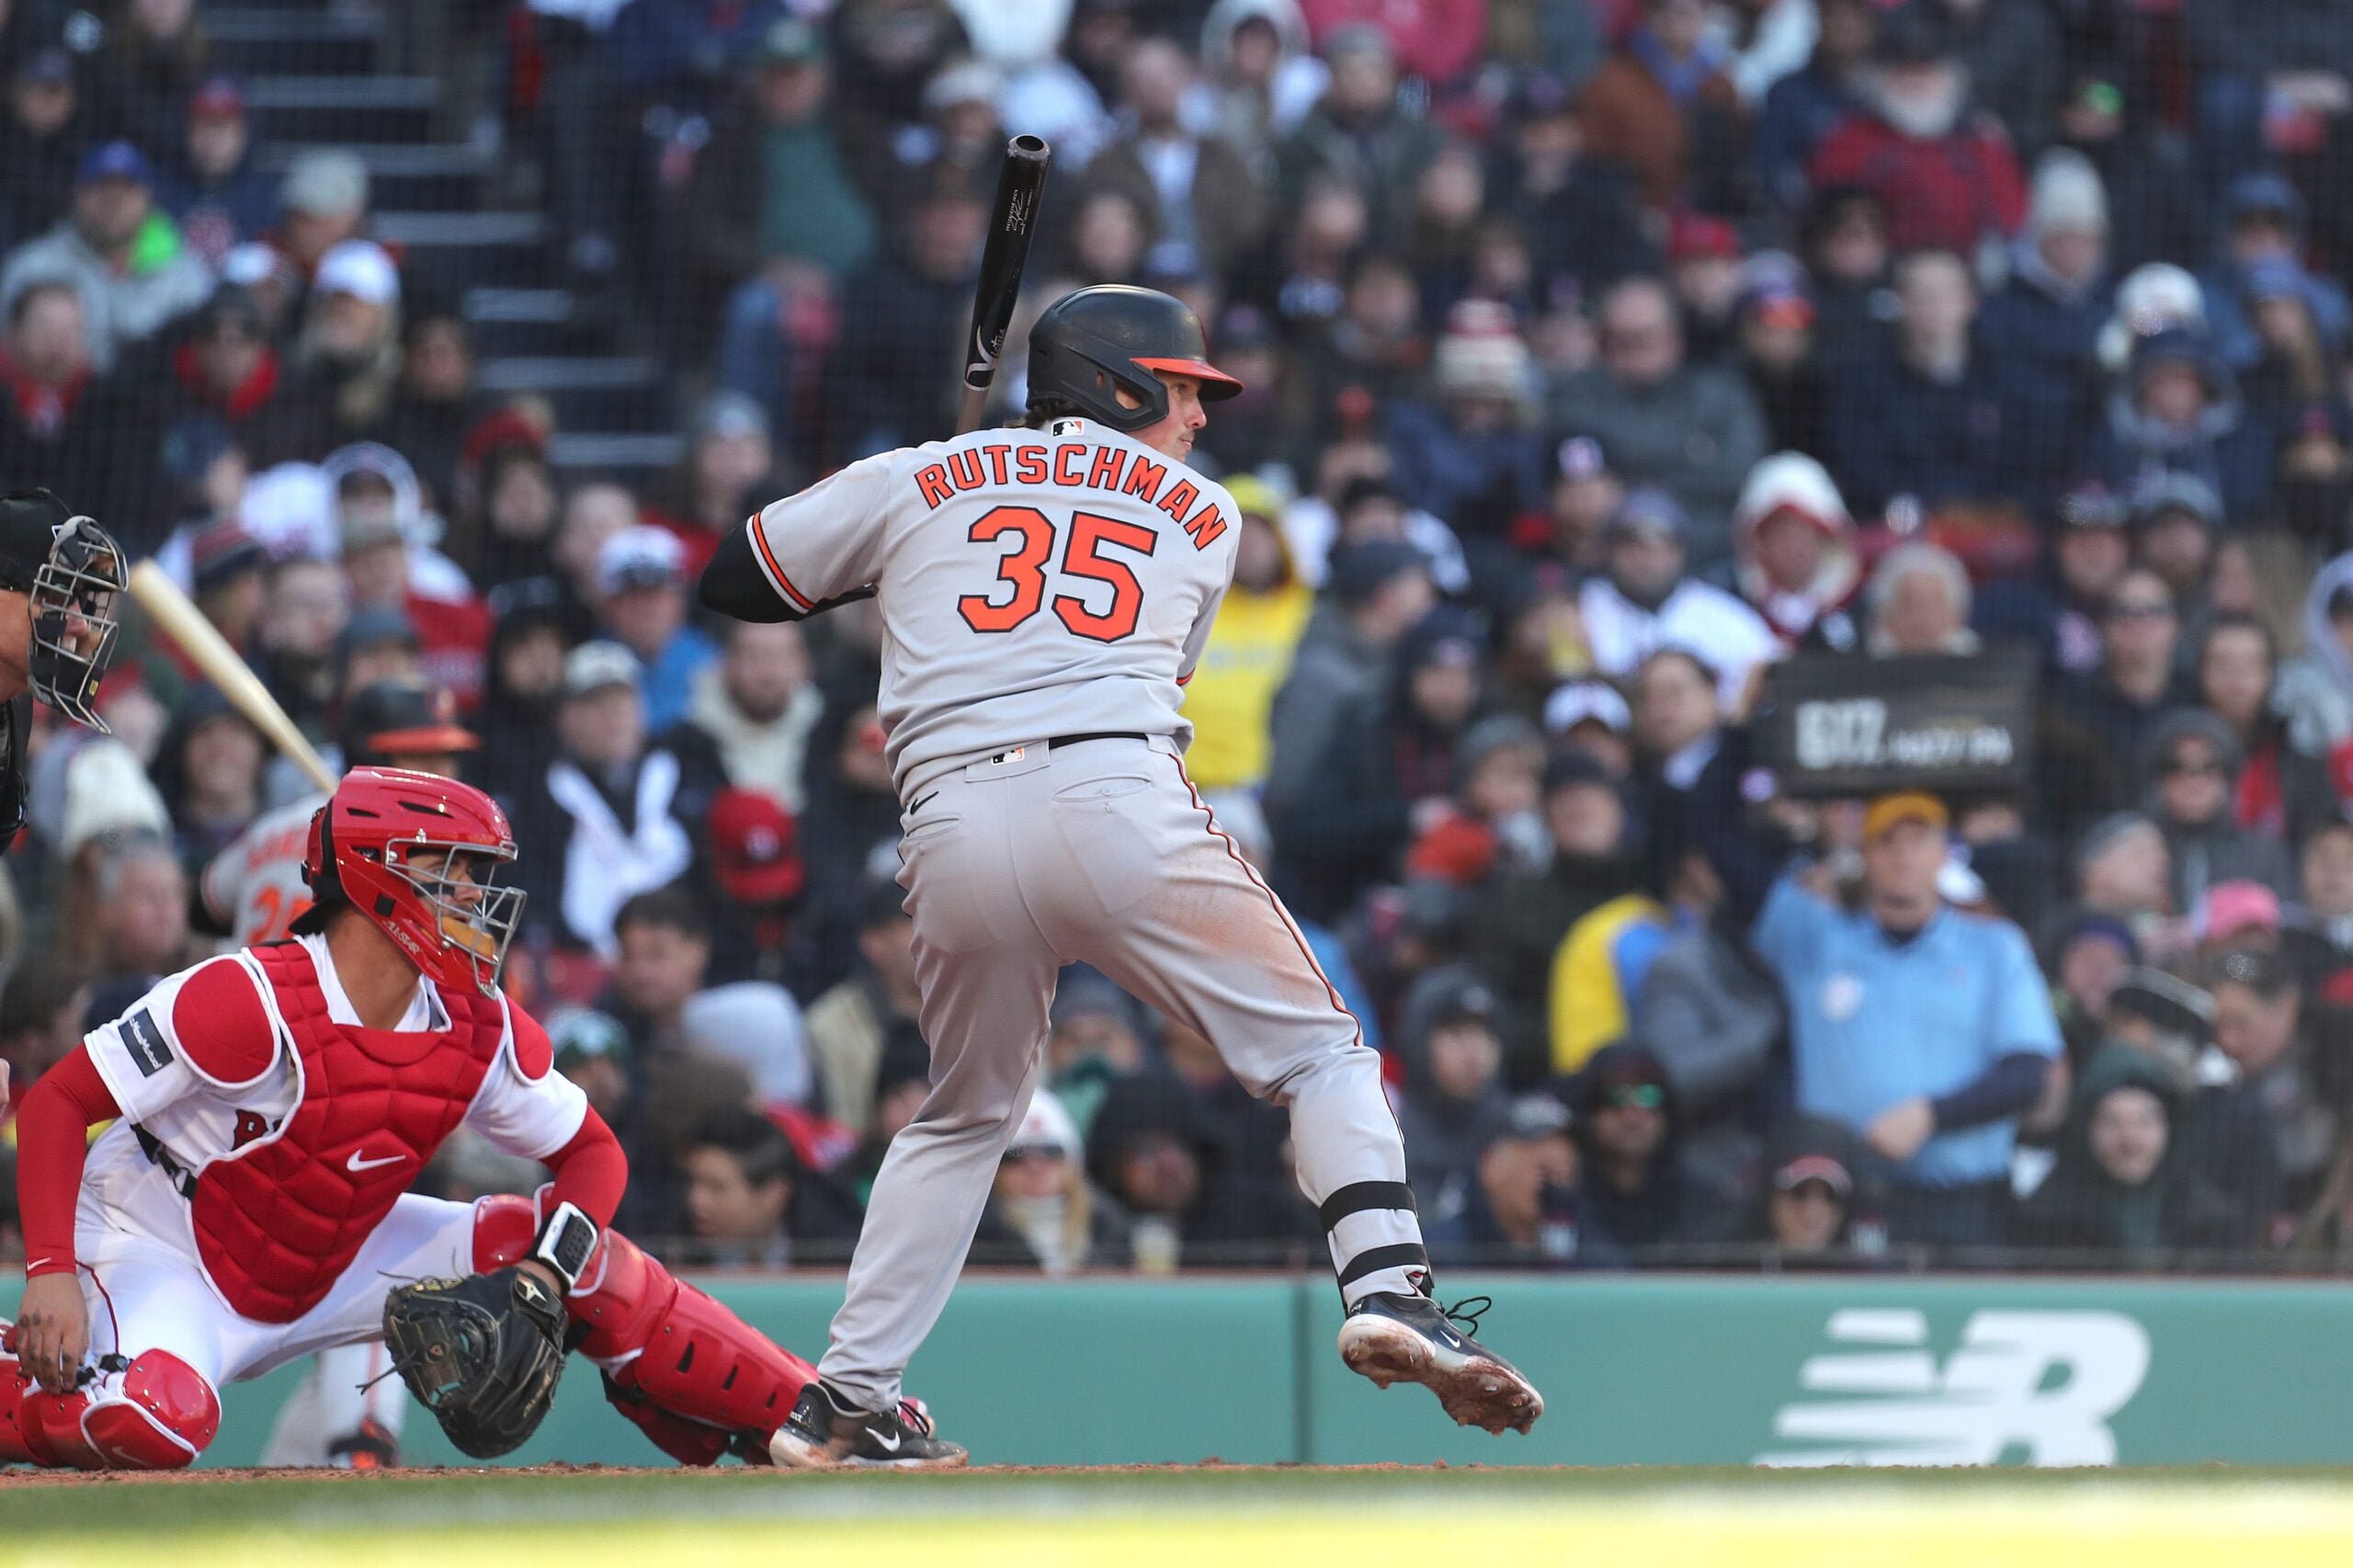 Adley Rutschman #35 of the Baltimore Orioles bats during the fifth inning against the Boston Red Sox on Opening Day at Fenway Park